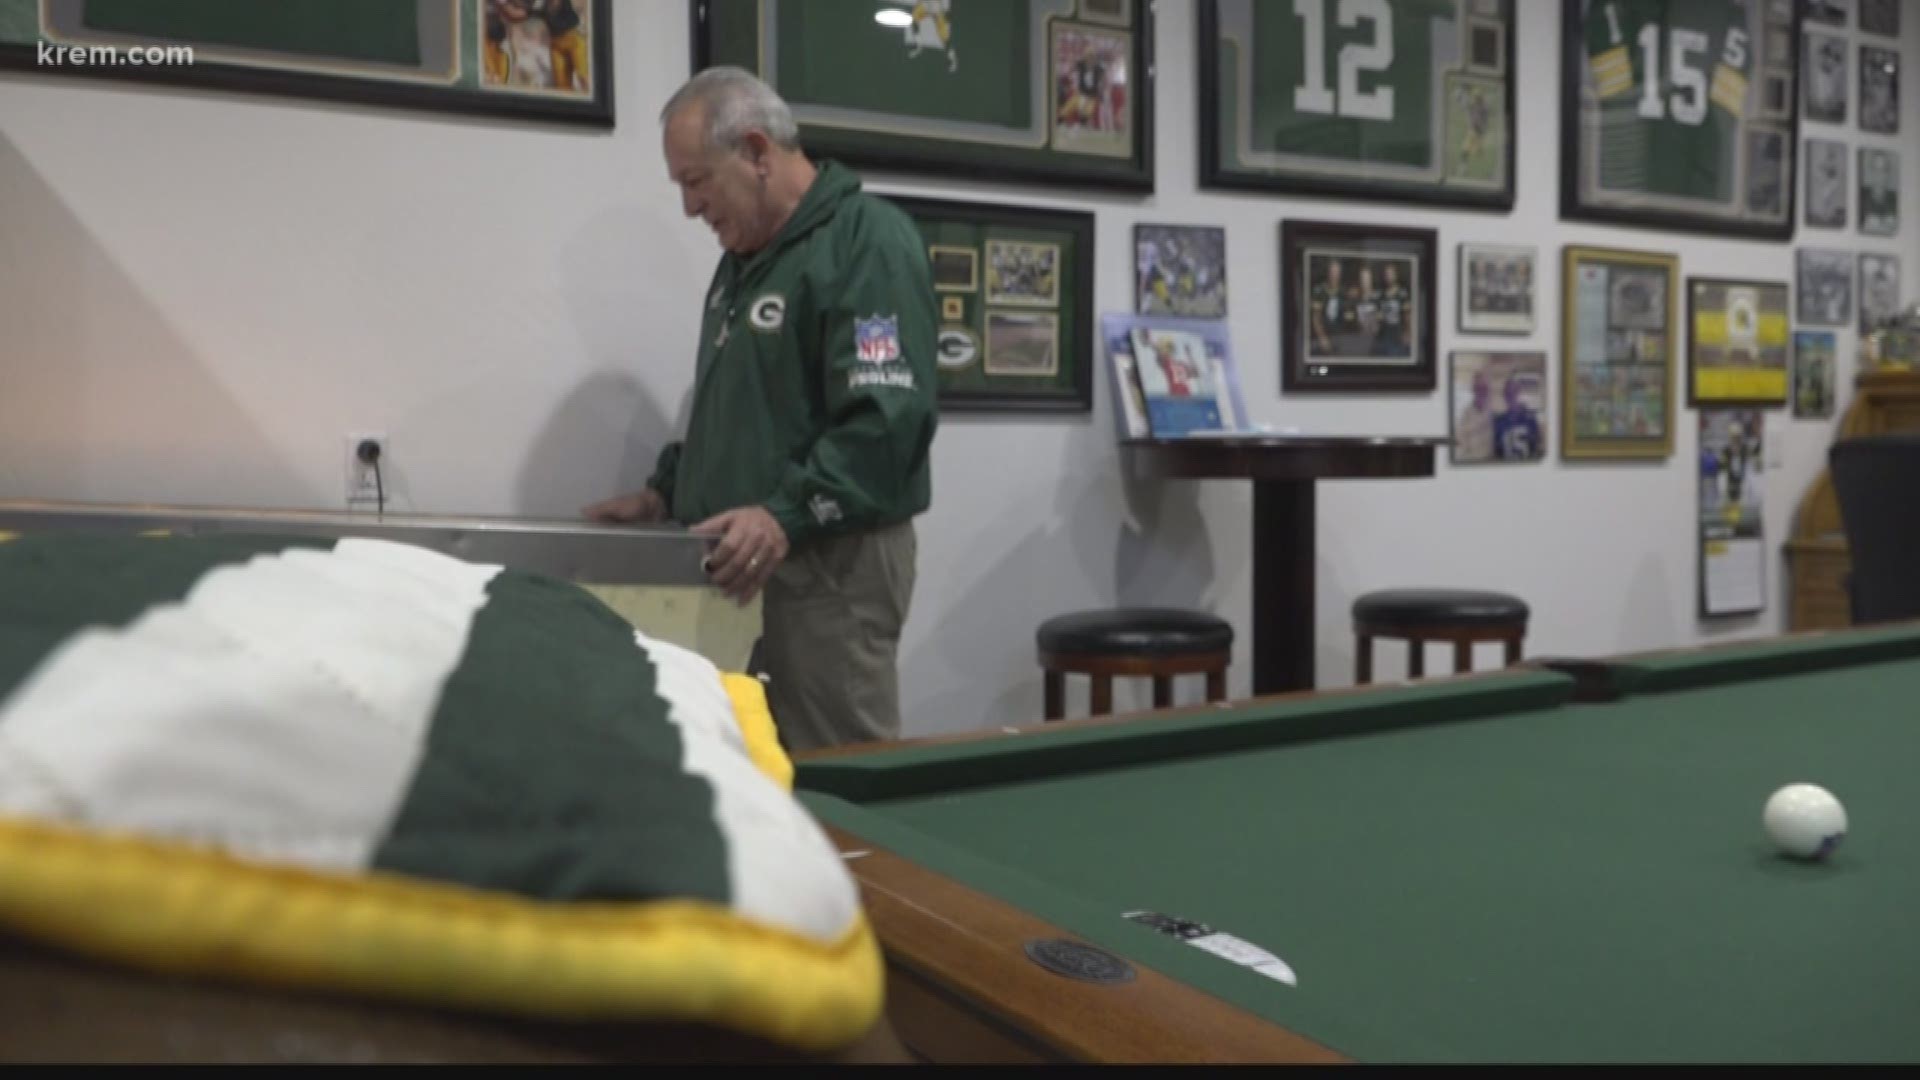 Bill Hughes needs votes to win and become this year's inductee. He has been a packer fan since 1965 and has been collecting memorabilia ever since.